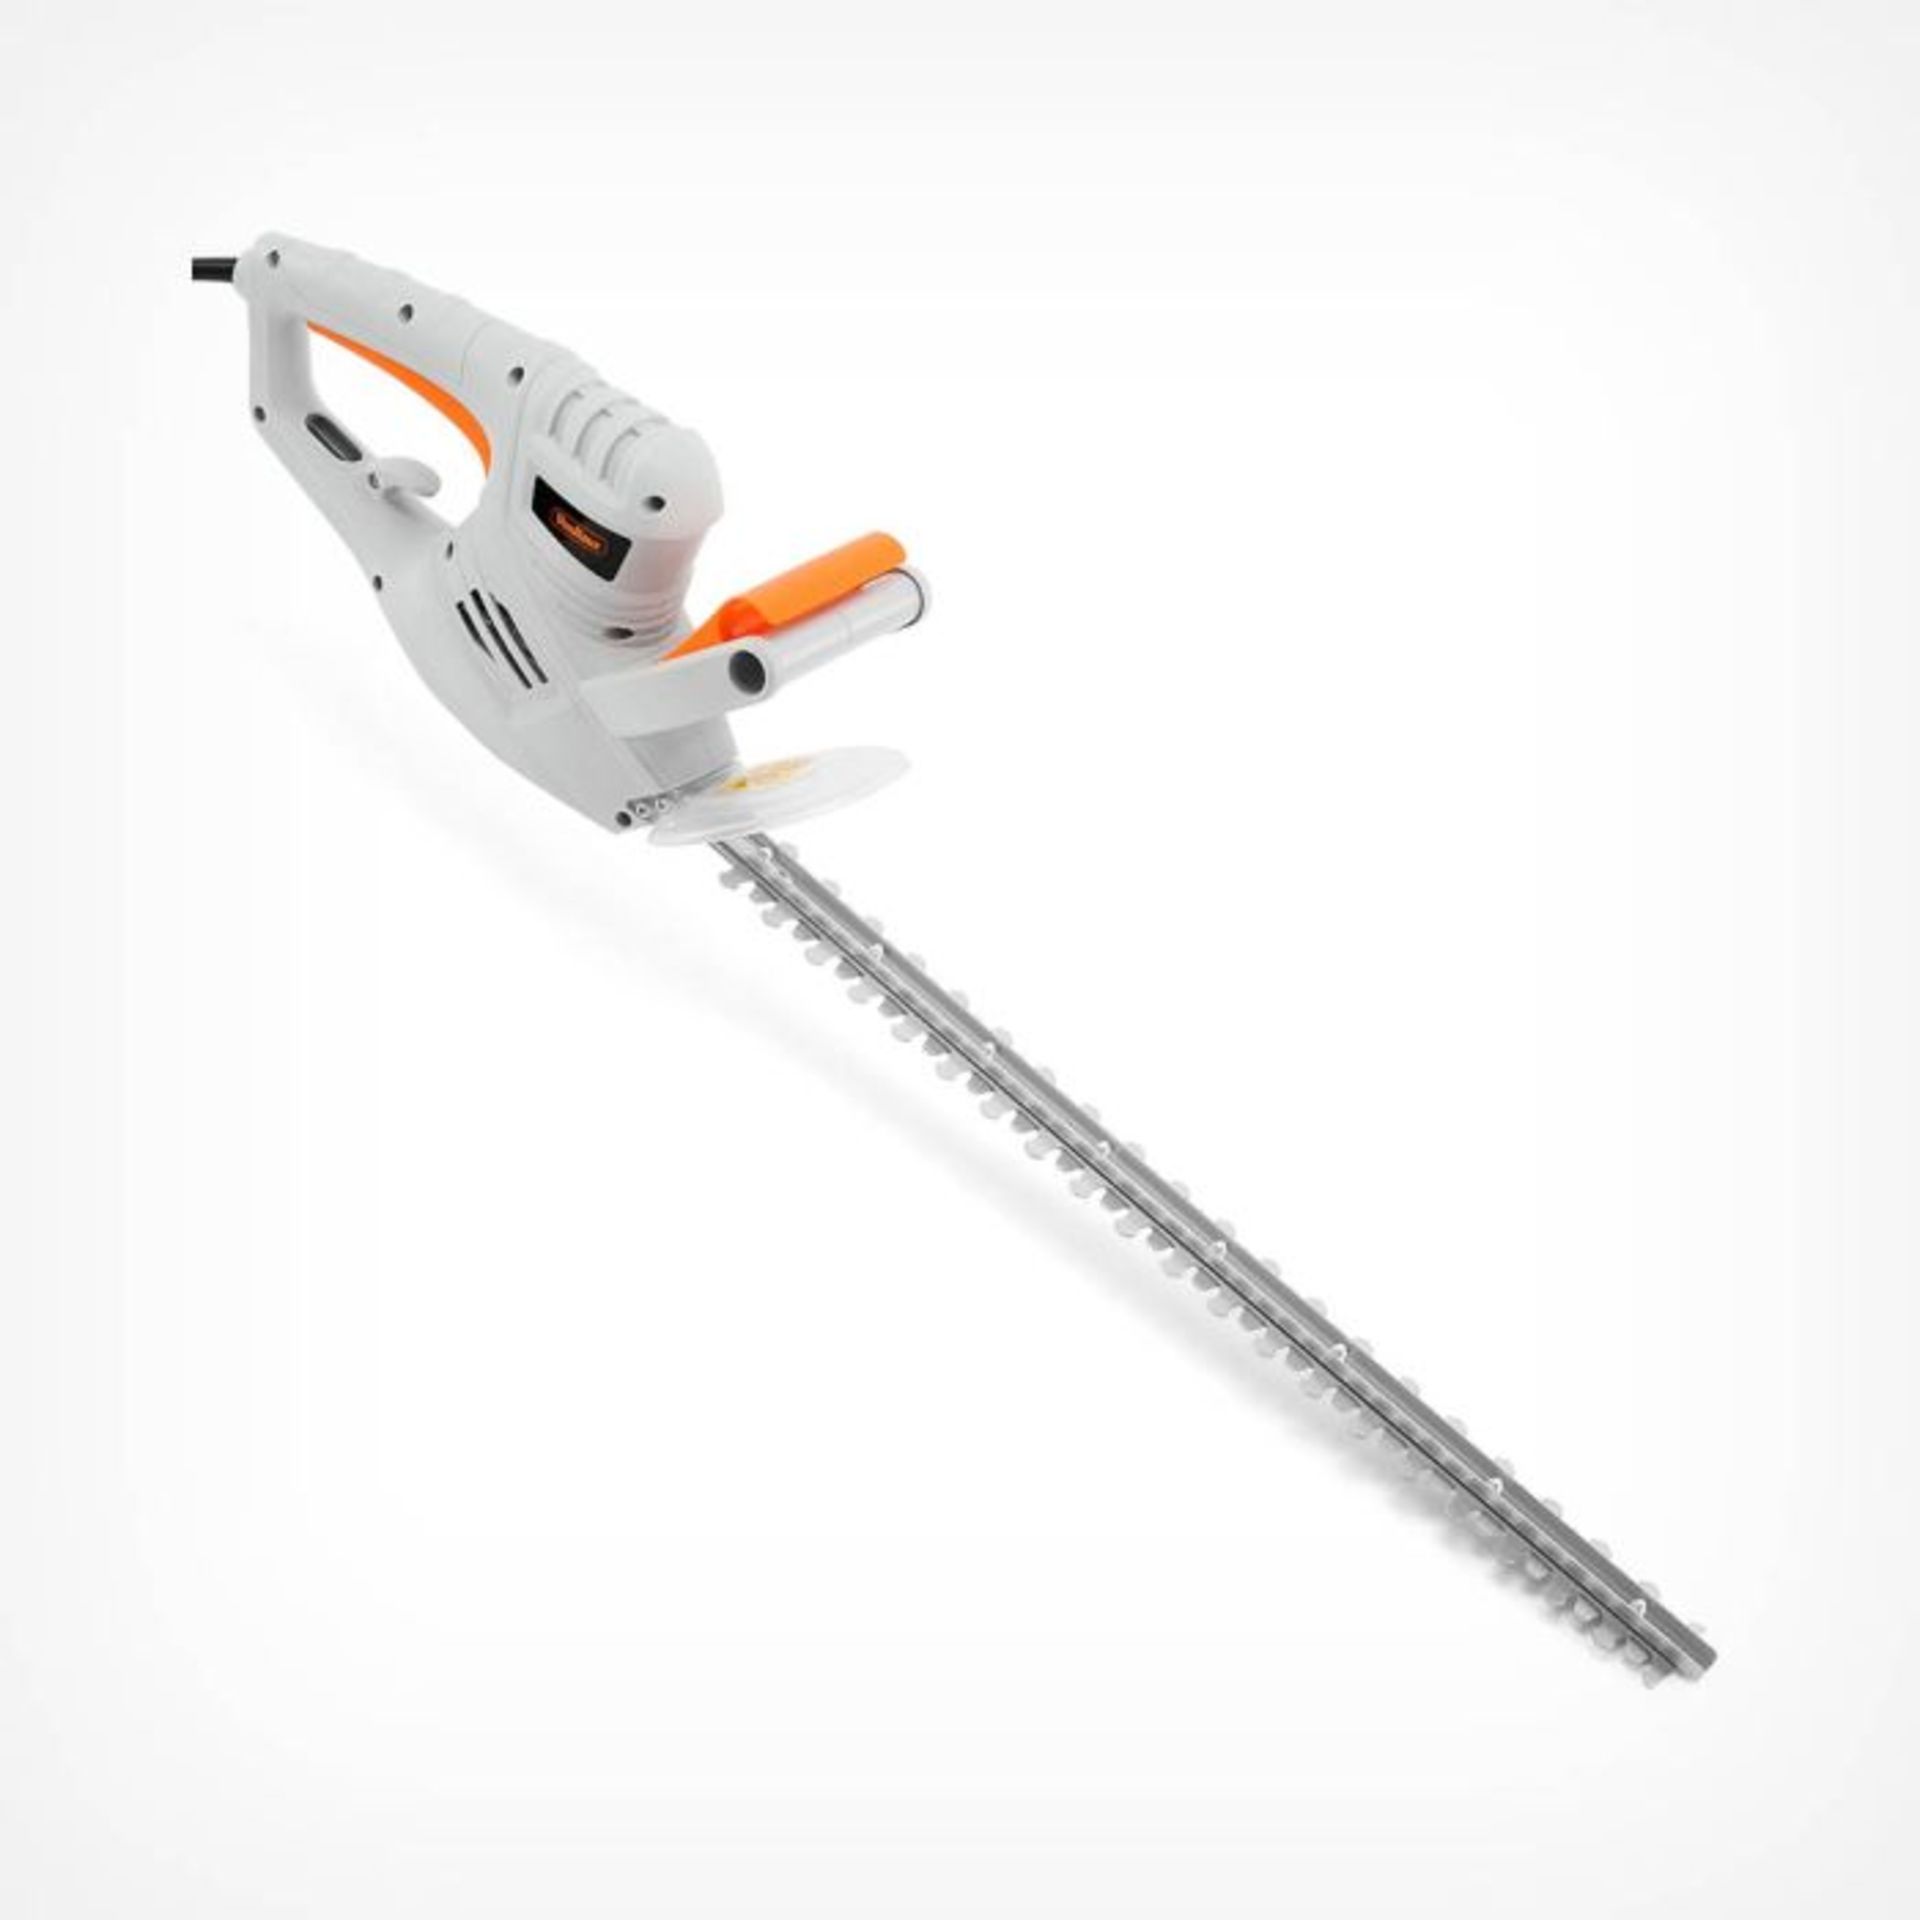 550W Hedge Trimmer. - ER34. Designed for fast, efficient cutting, the hedge trimmer features a